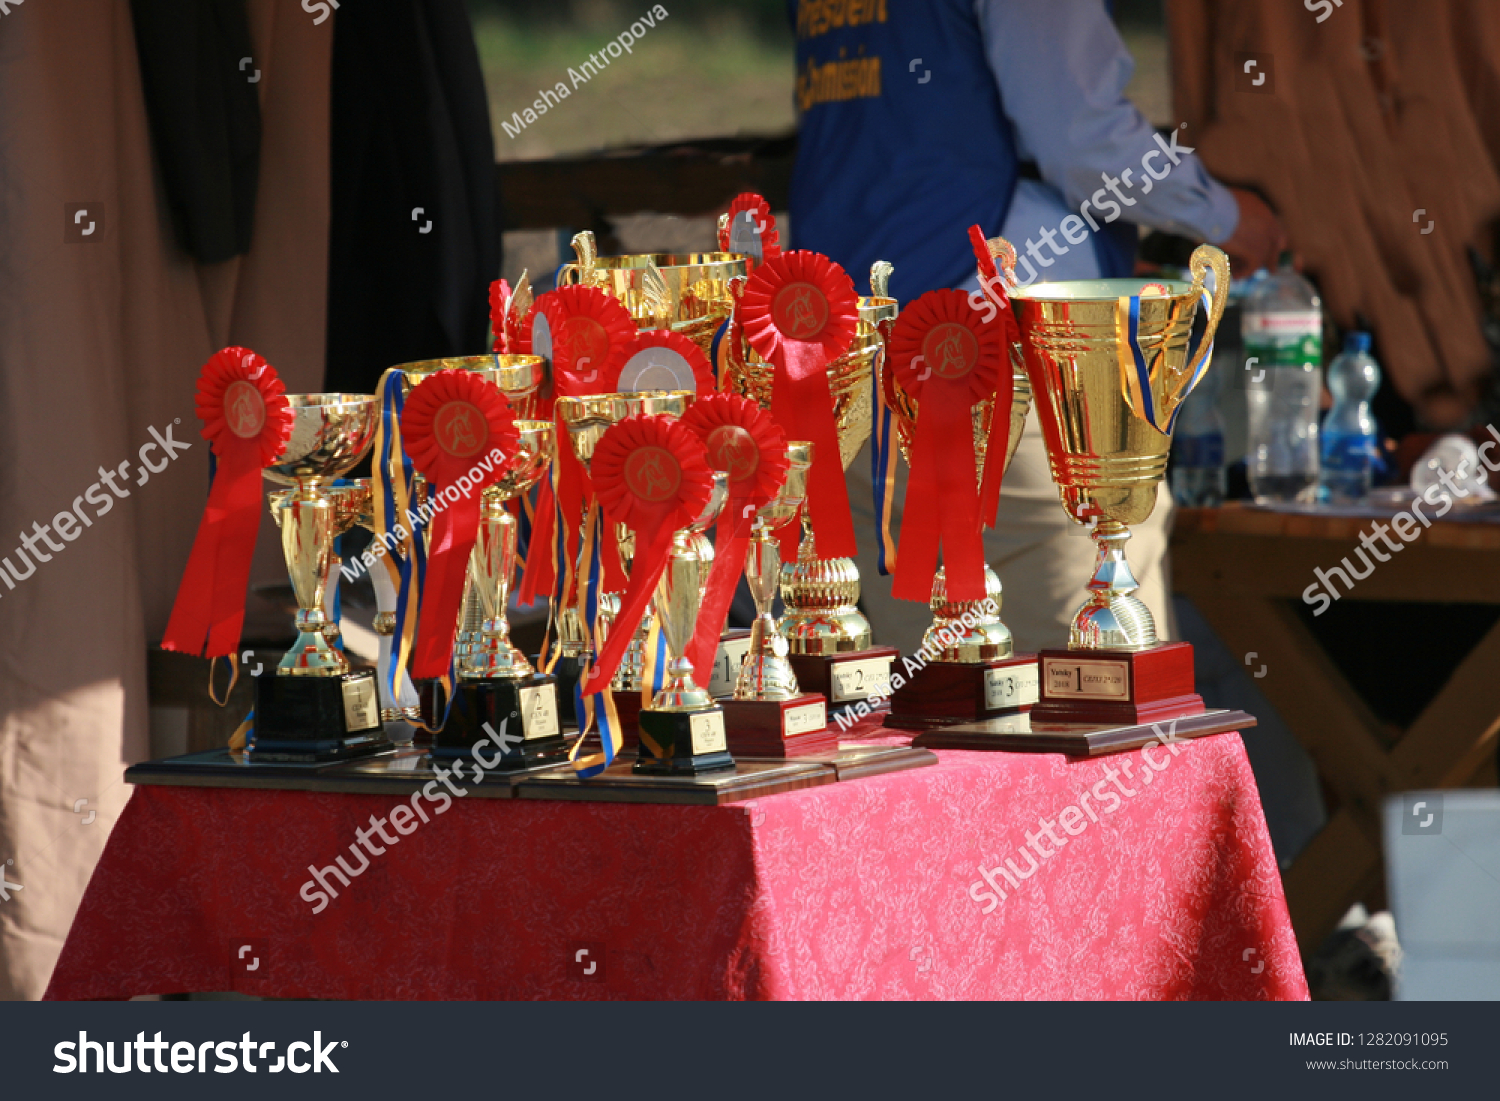 Cup of horses endurance on the table with red rosettes #1282091095